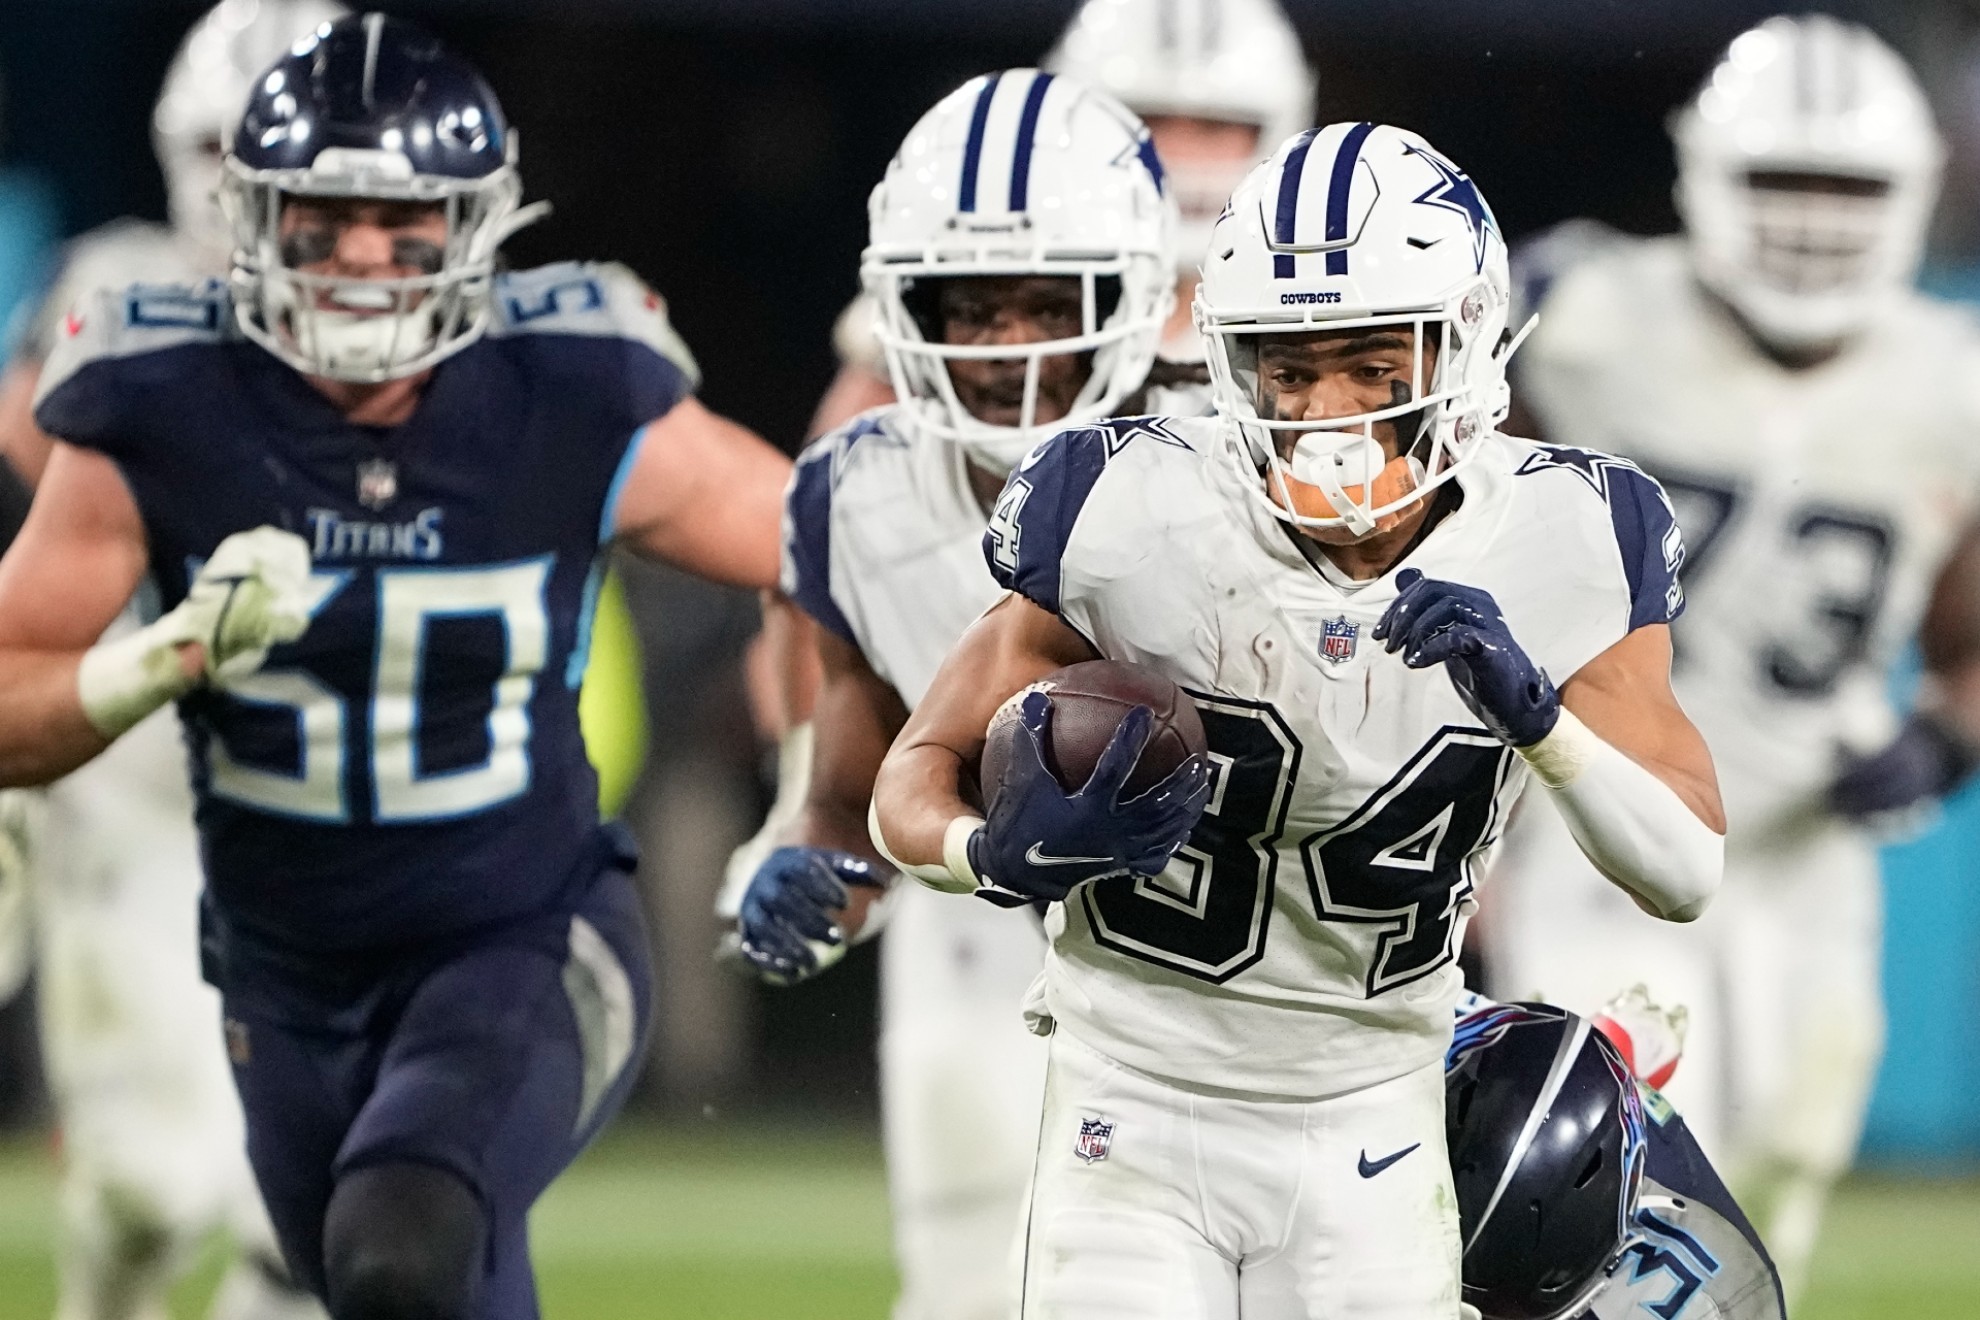 Cowboys-Titans: Final score, full highlights and play-by-play